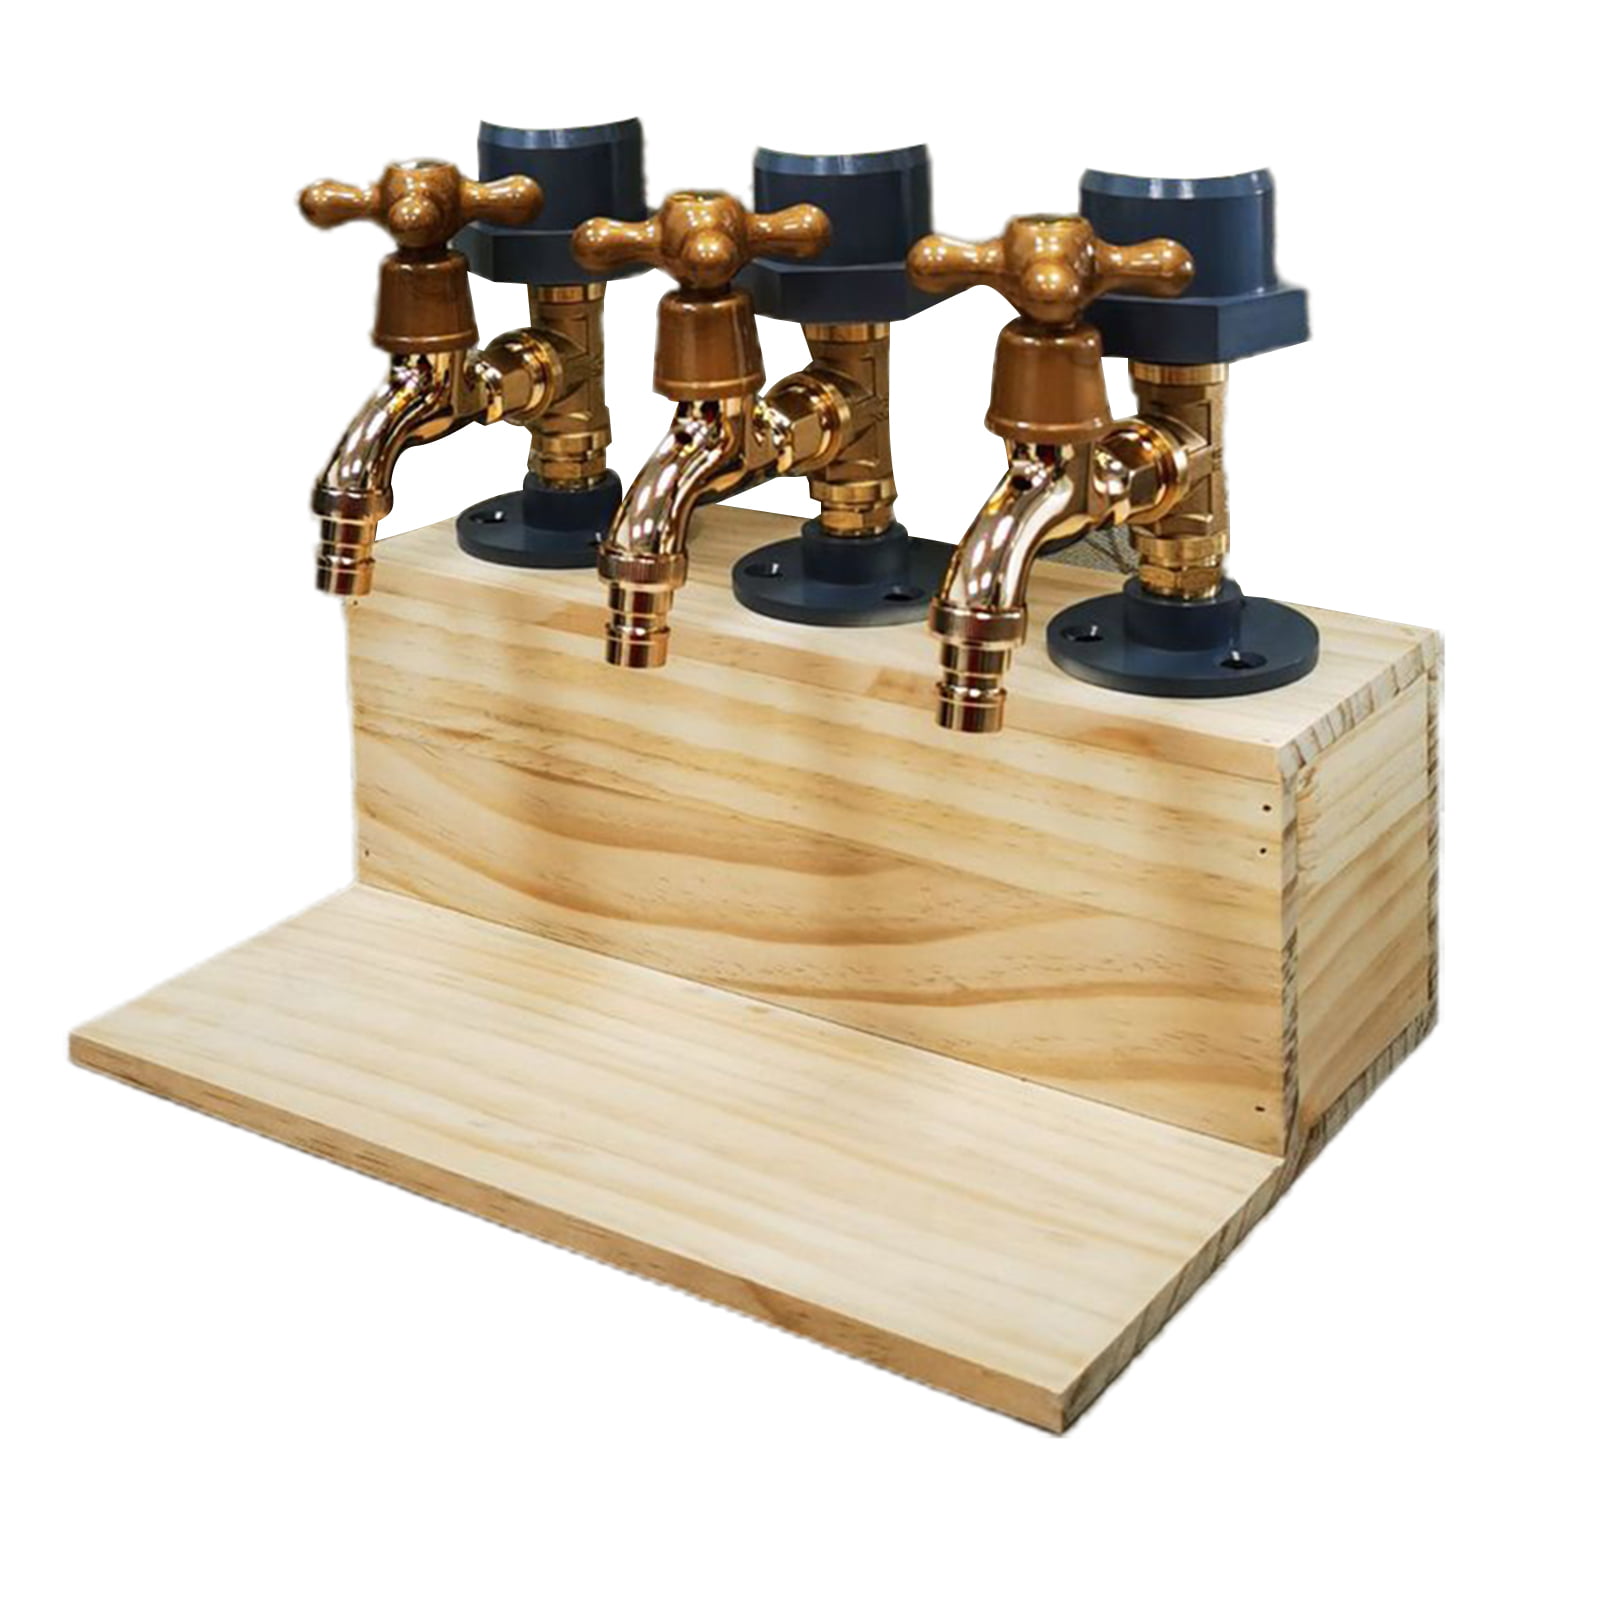 HOLDER for 6 bottles of Ma Petite Brasserie beer in wood with bottle opener  for 25, 33 and 50 cl bottles SOURIRE DES SAVEURS, Wi